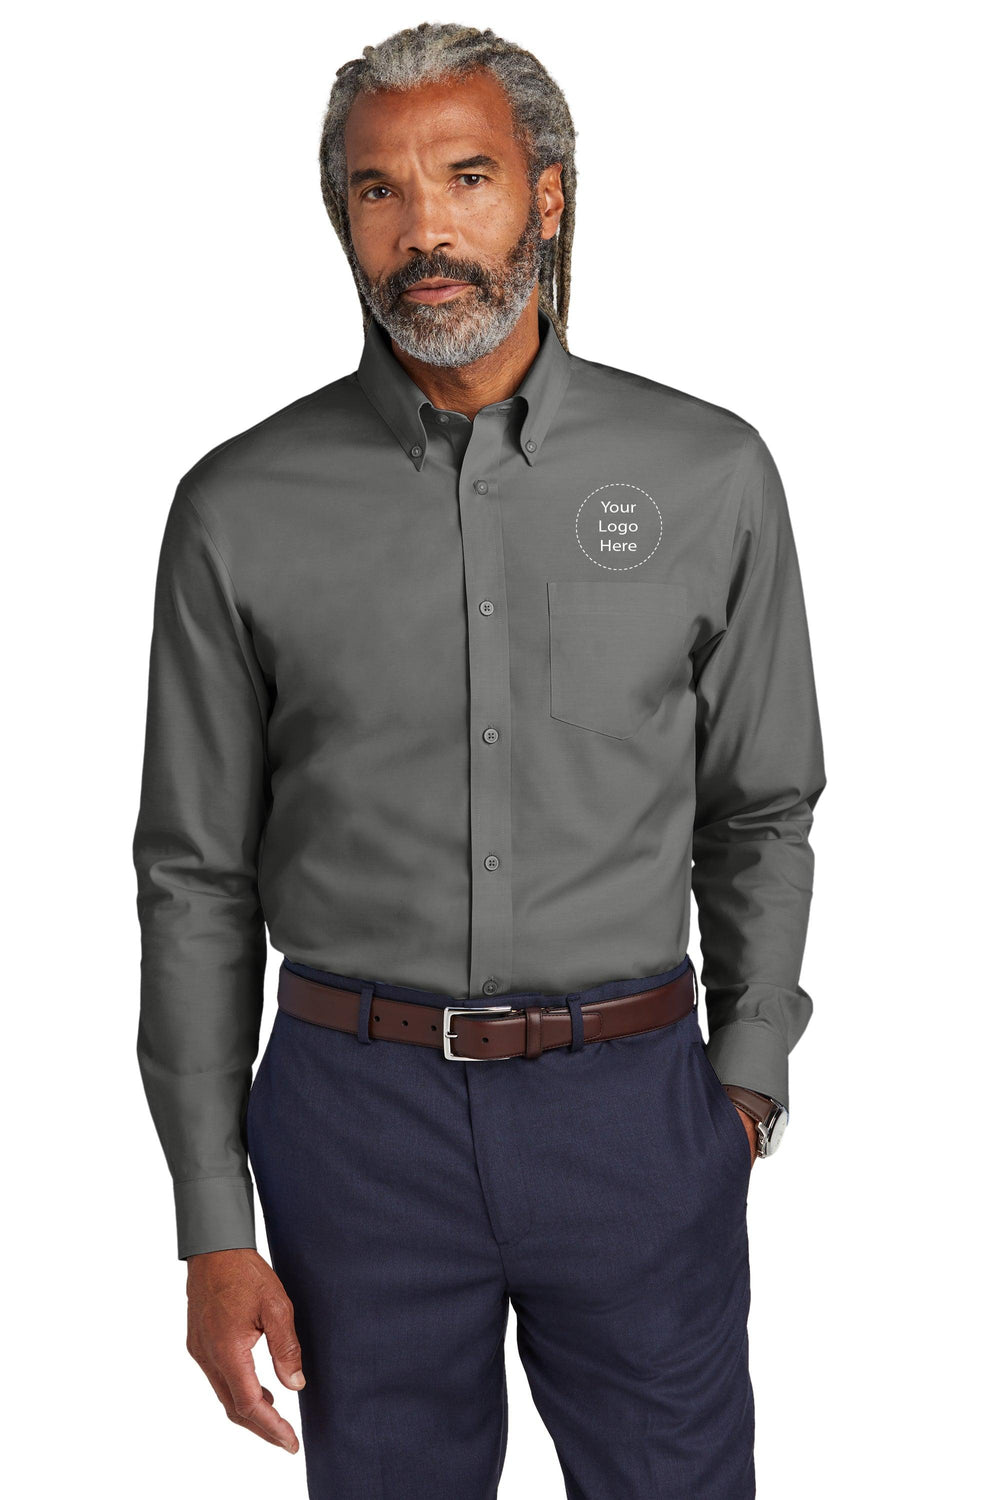 Keller Williams NEW KW-BB18000 Brooks Brothers® Wrinkle-Free Stretch Pinpoint Shirt 